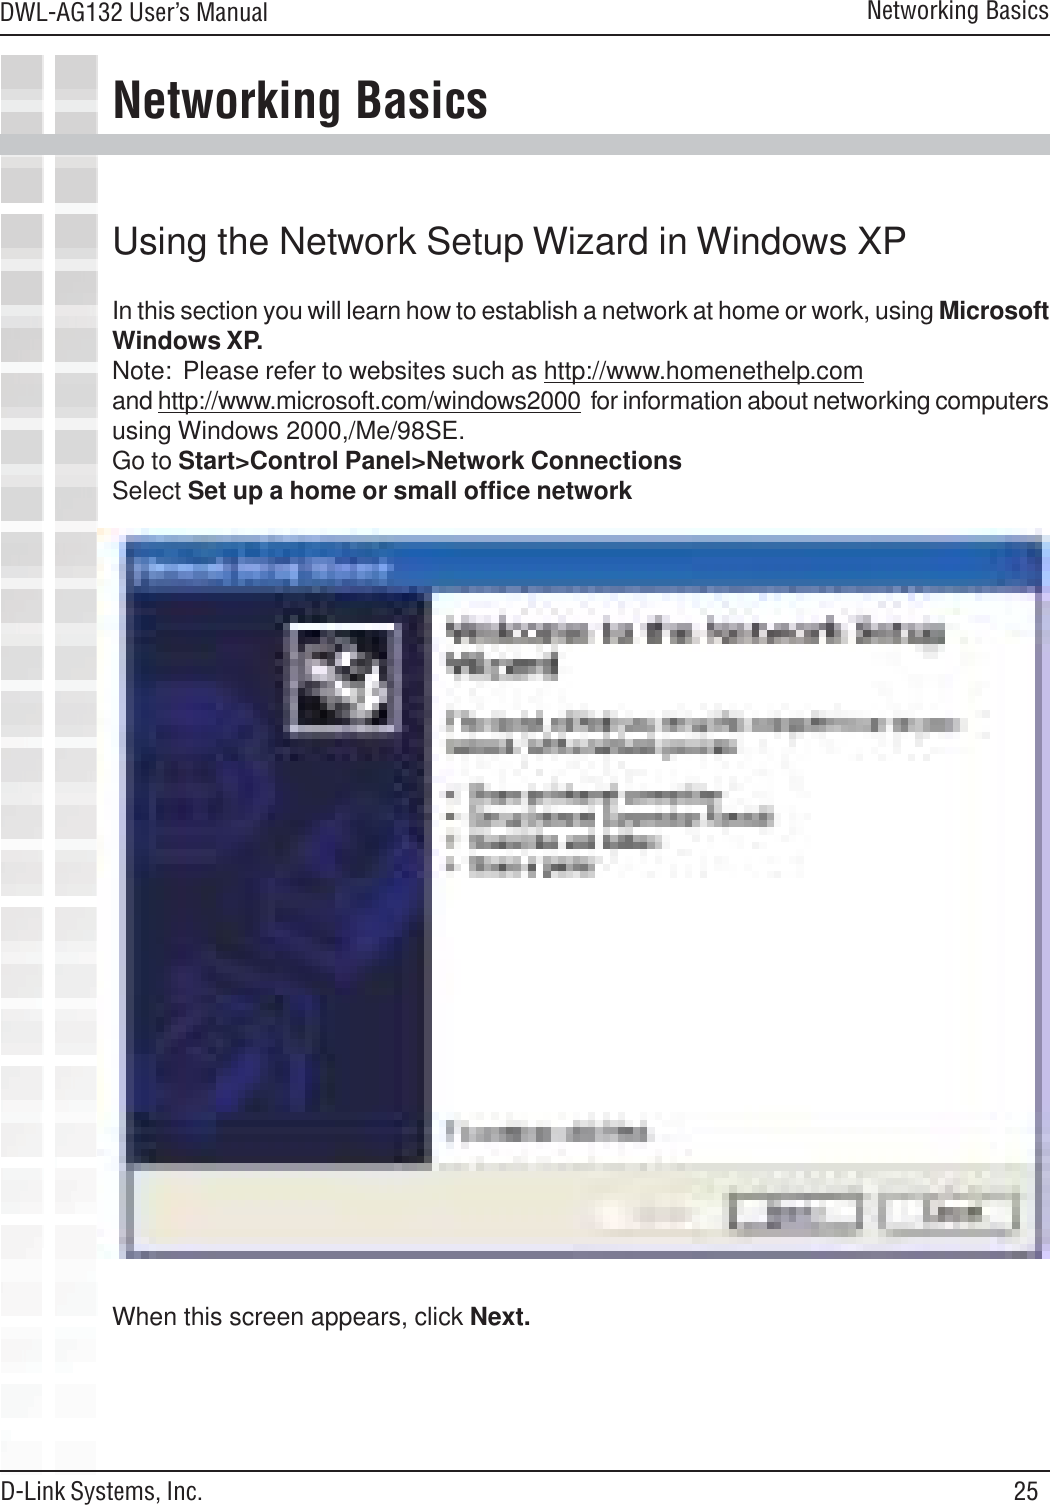 25DWL-AG132 User’s ManualD-Link Systems, Inc.Networking BasicsNetworking BasicsUsing the Network Setup Wizard in Windows XPIn this section you will learn how to establish a network at home or work, using MicrosoftWindows XP.Note:  Please refer to websites such as http://www.homenethelp.comand http://www.microsoft.com/windows2000  for information about networking computersusing Windows 2000,/Me/98SE.Go to Start&gt;Control Panel&gt;Network ConnectionsSelect Set up a home or small office networkWhen this screen appears, click Next.